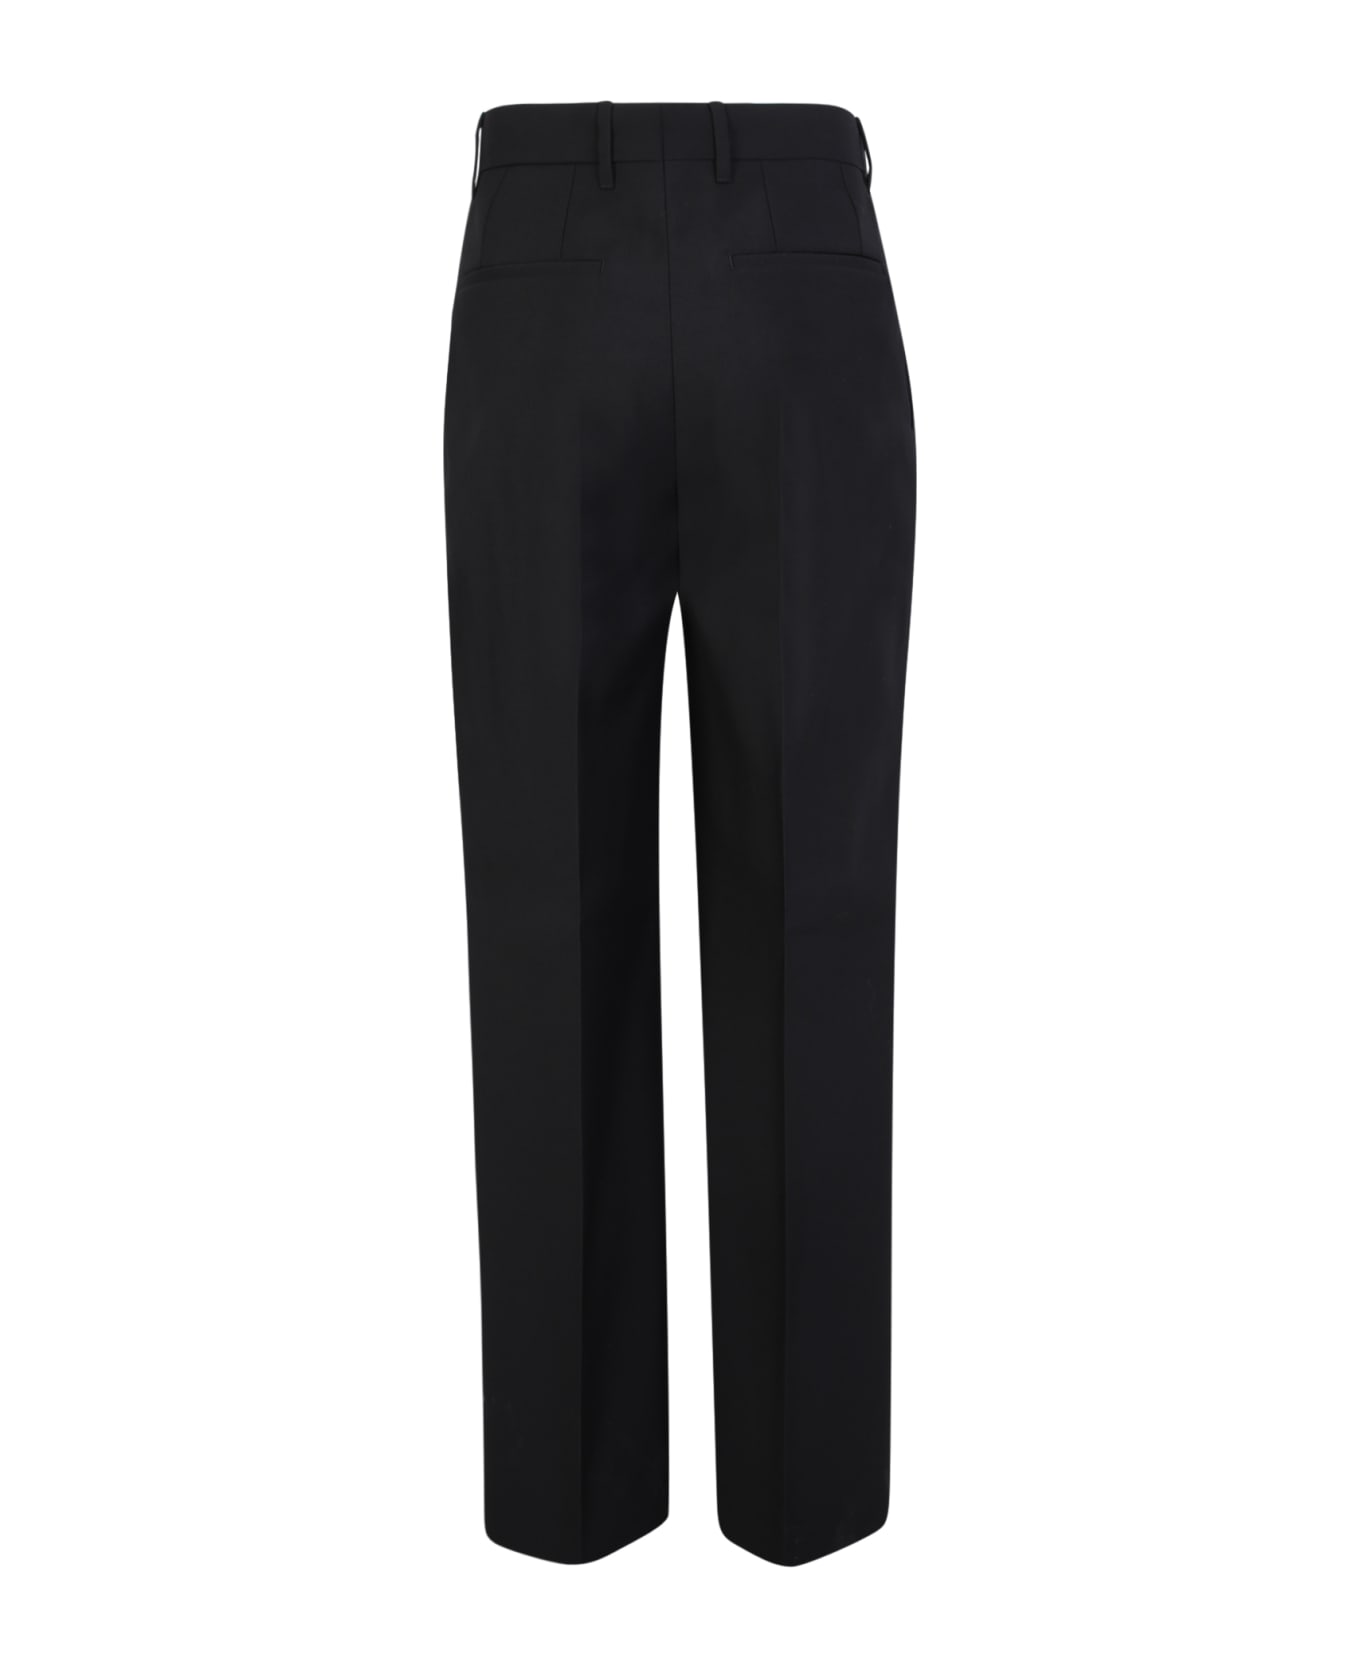 Burberry Black Tailored Trousers - Black ボトムス